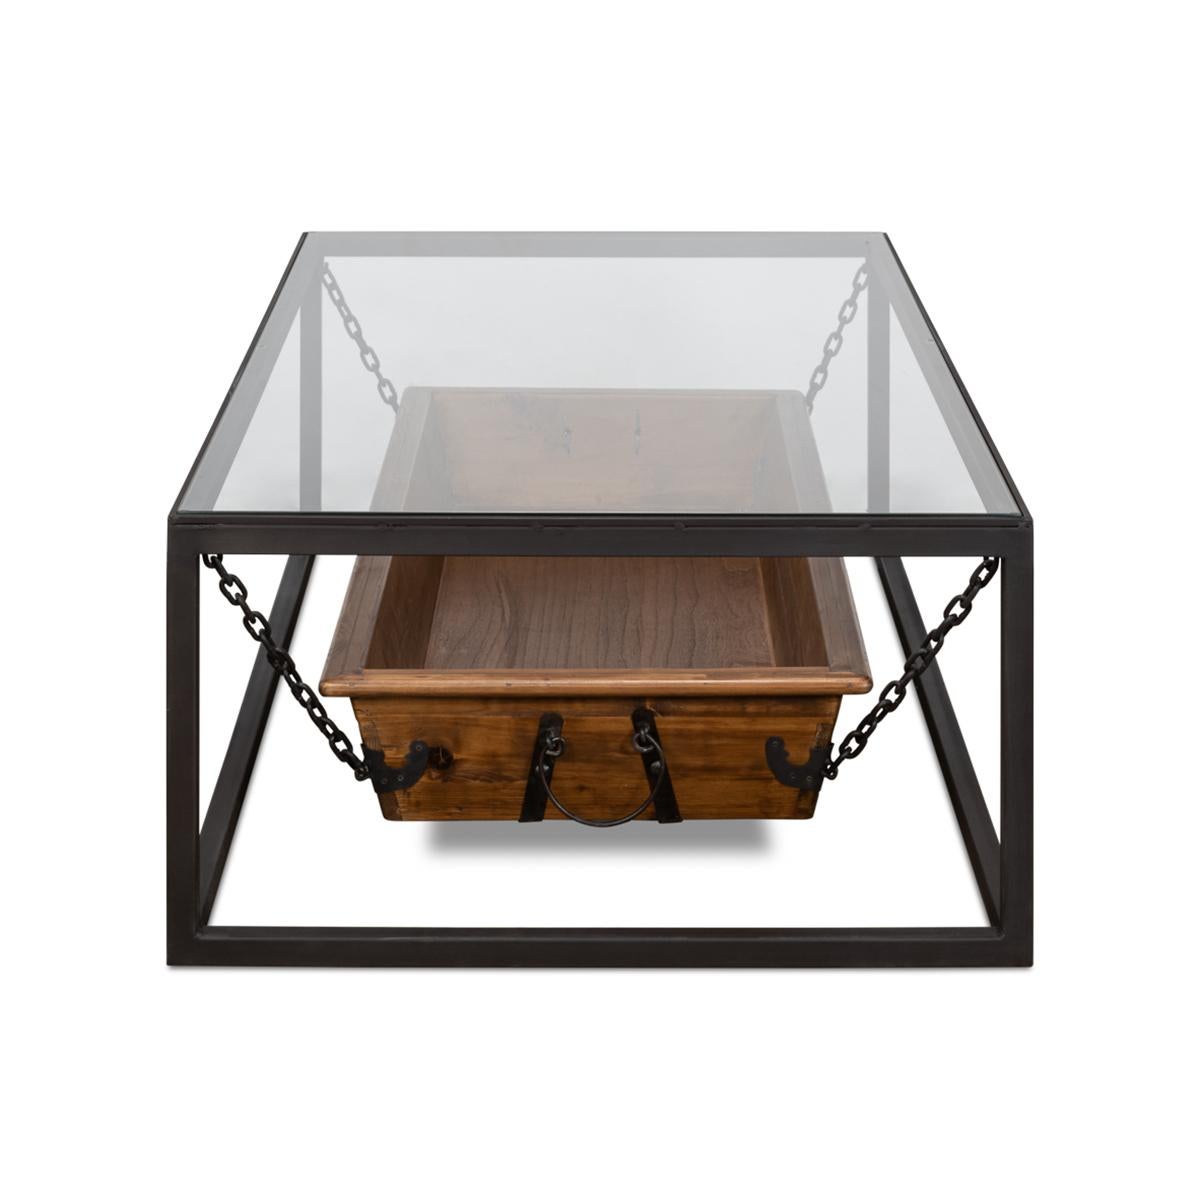 An antique trough coffee table. This piece features an antique trough suspended by a metal base with a glass top. It is truly a conversation starter where antique meets modern industrial. 

Dimensions: 51